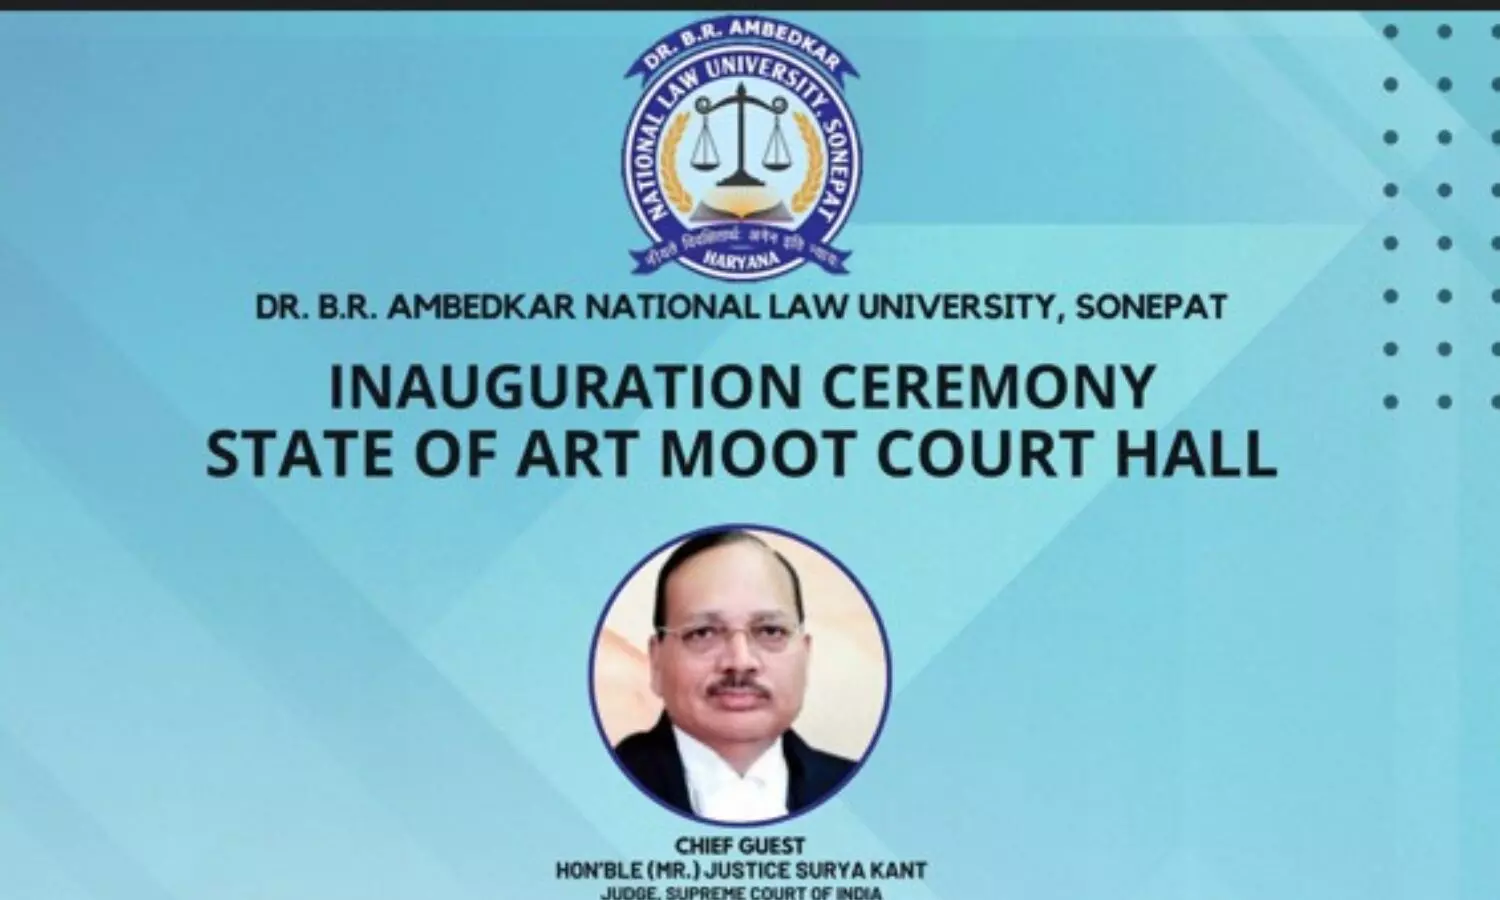 A New Chapter in Legal Education NLU Sonepat to Inaugurate New Moot Court Hall